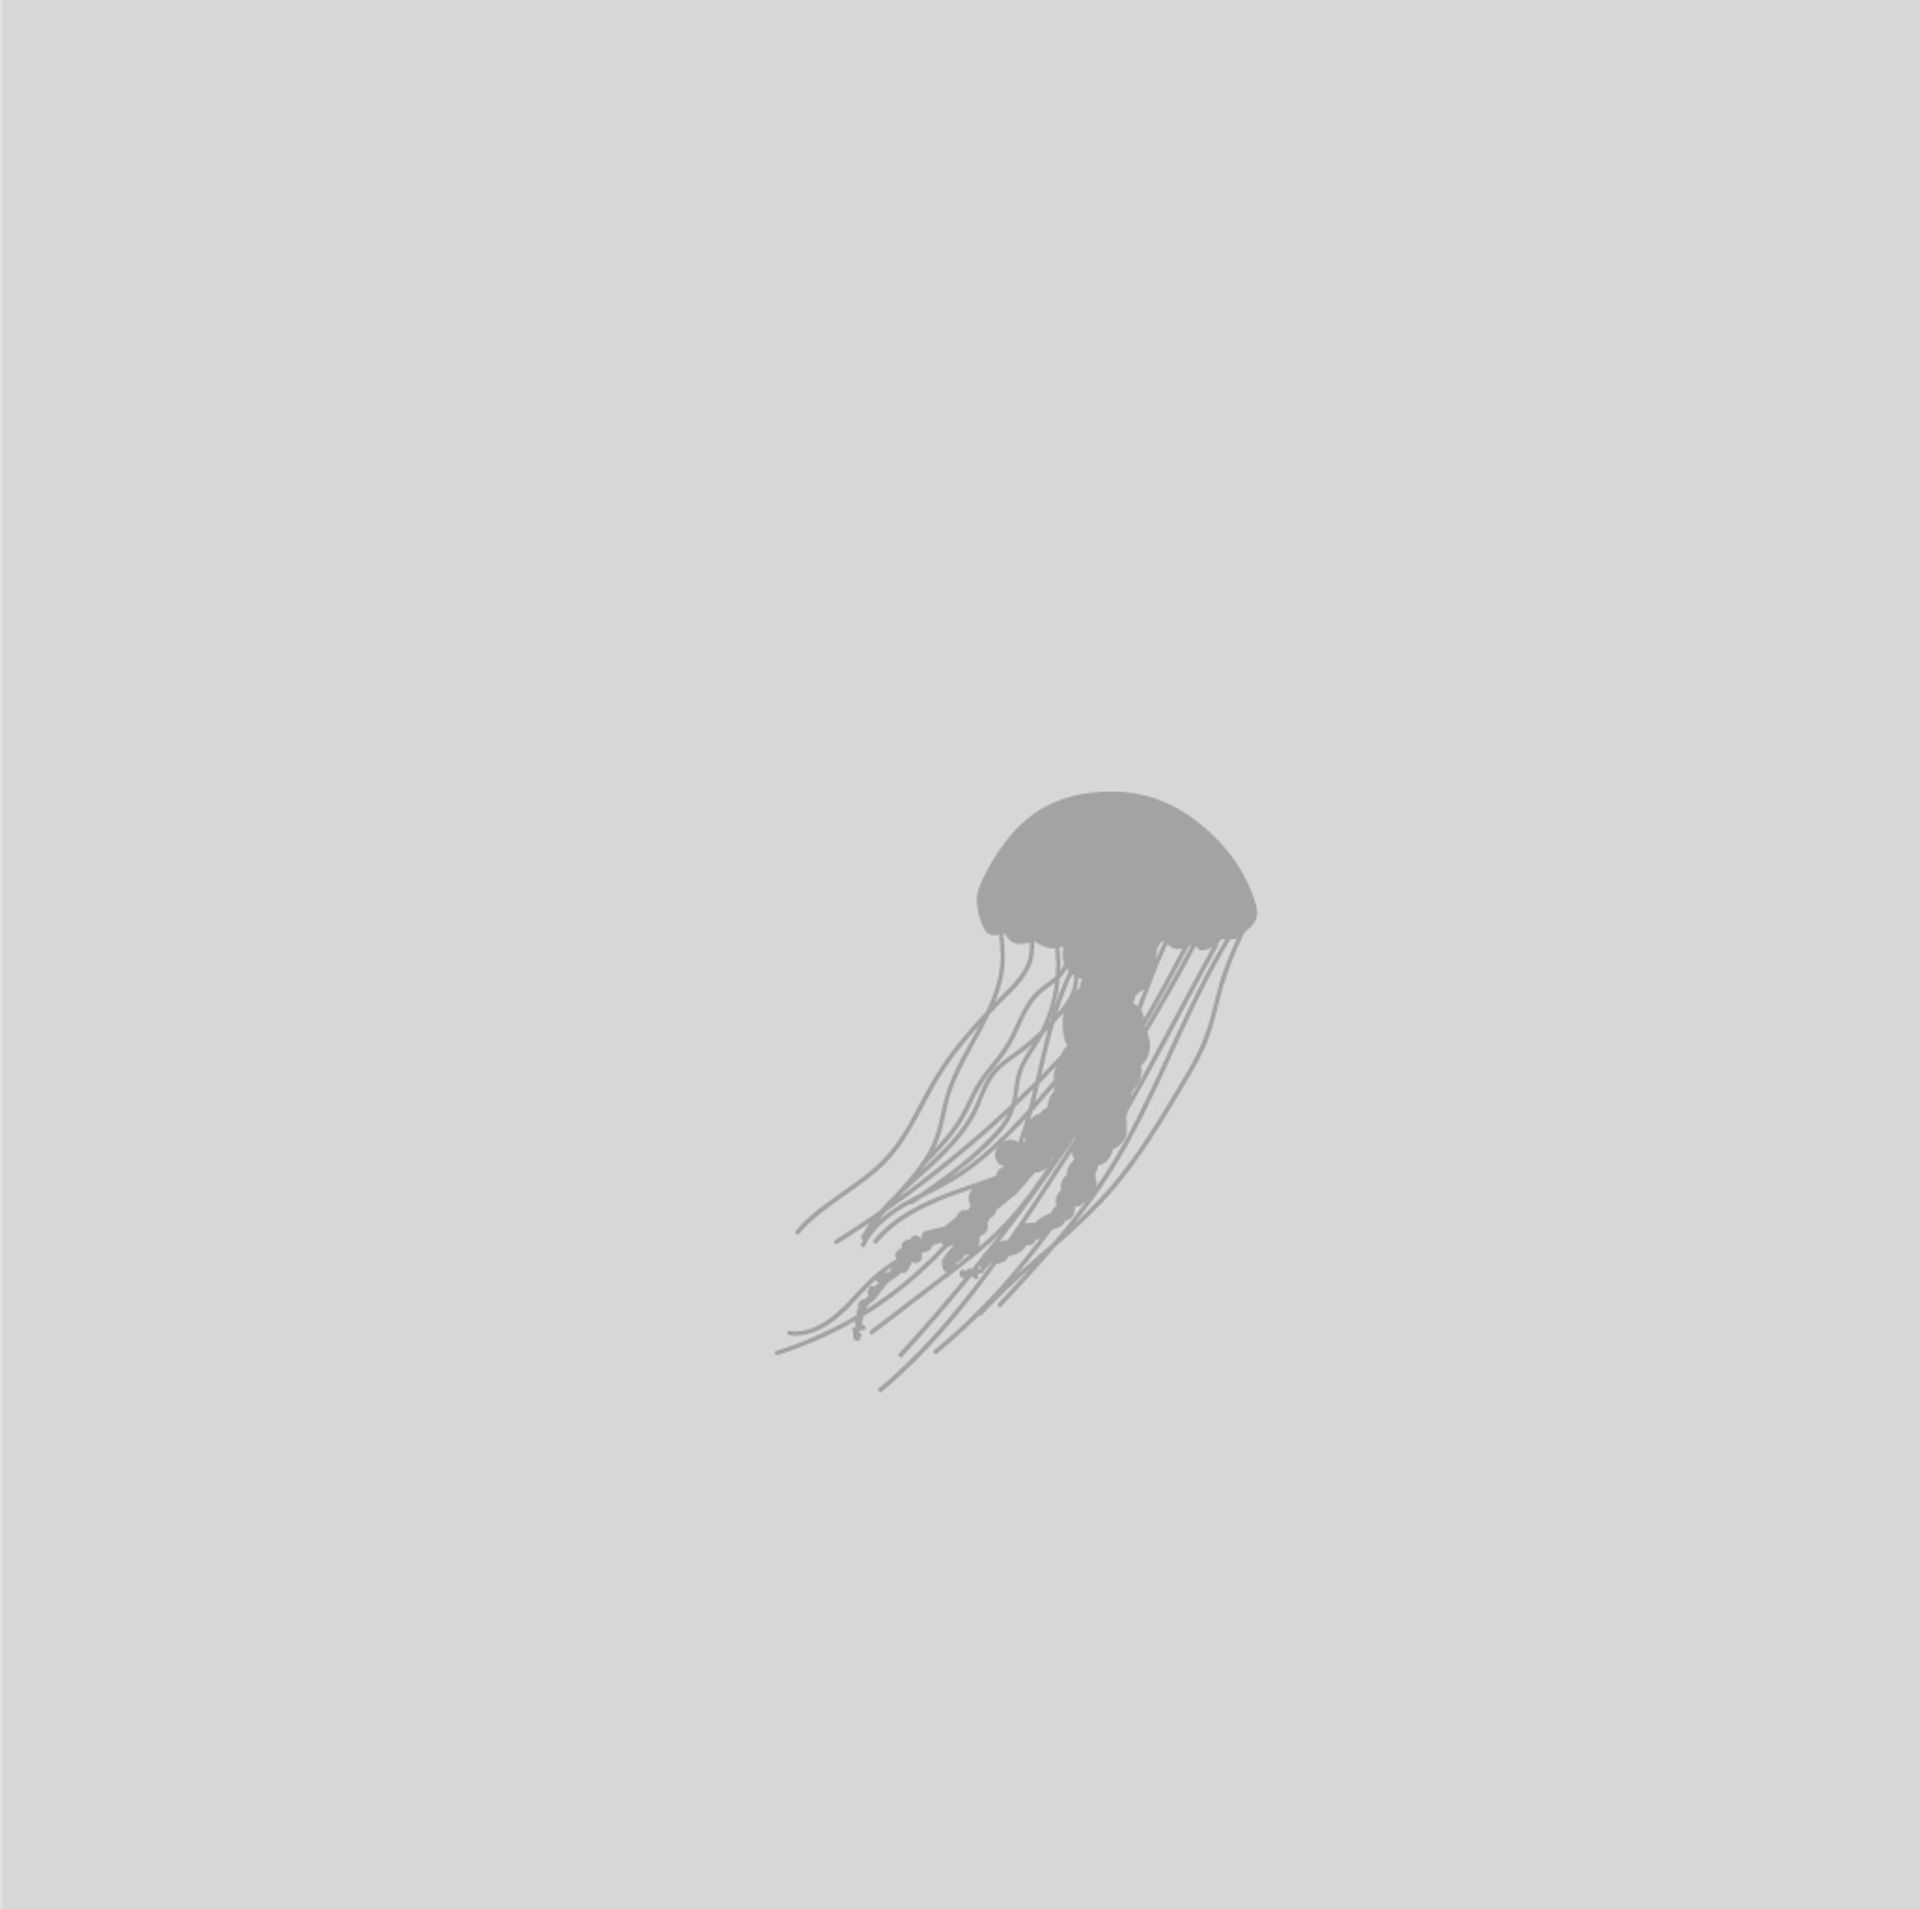 Two Thousand, Four Hundred Seventy-eight Jellyfish